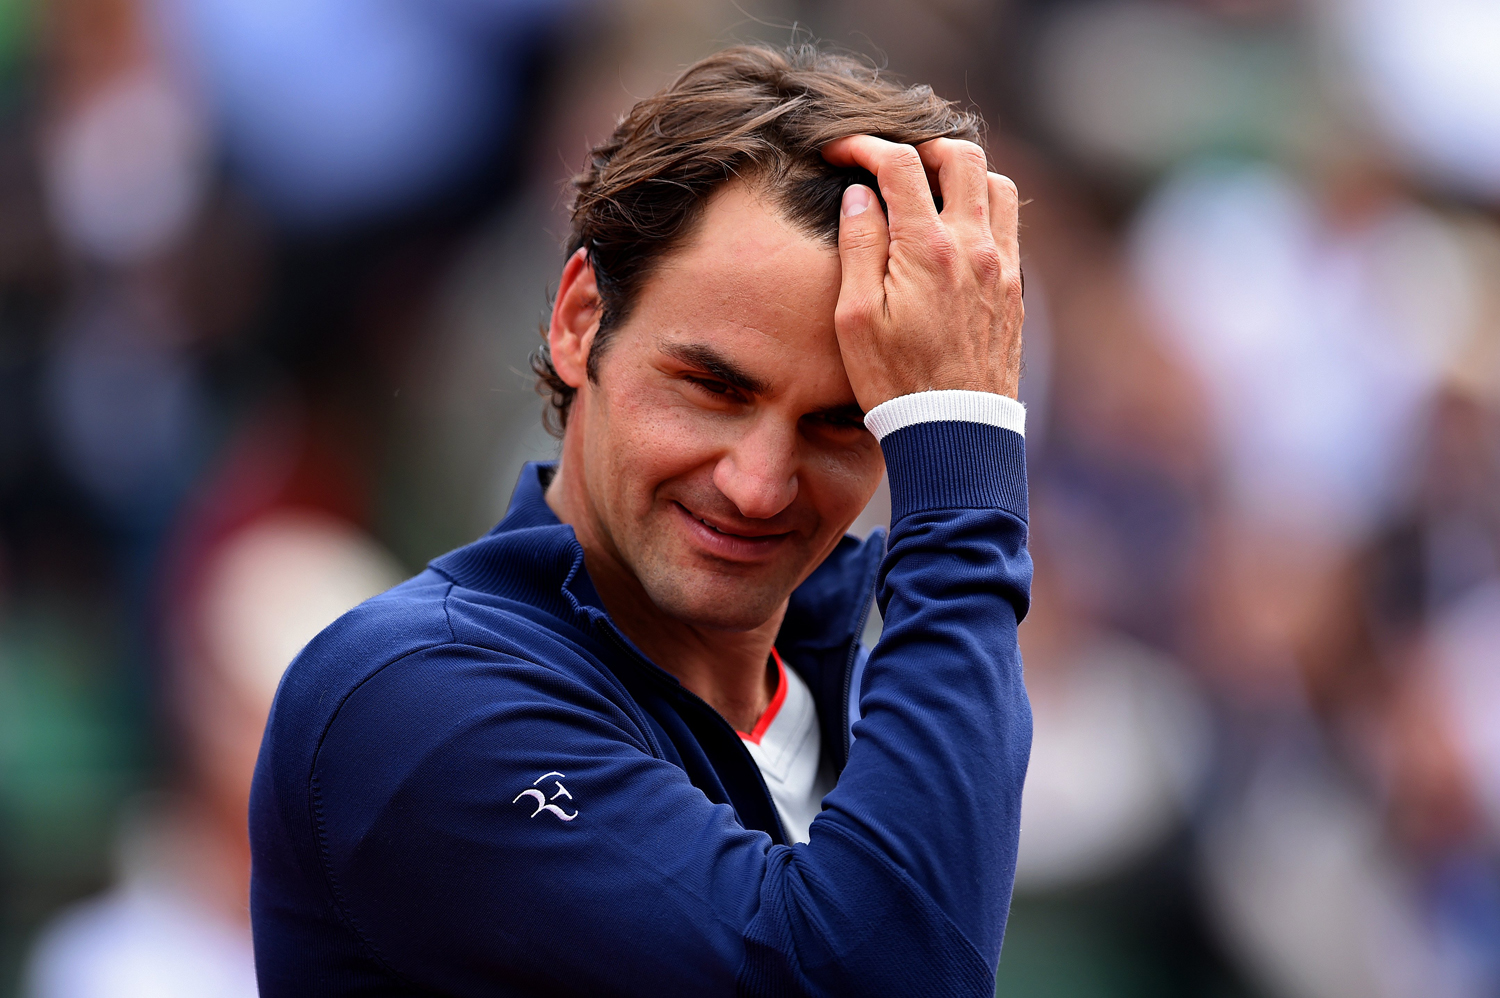 Roger Federer smiles following victory in his men's singles match against Lukas Lacko of Slovakia on day one of the French Open at Roland Garros on May 25, 2014 in Paris.